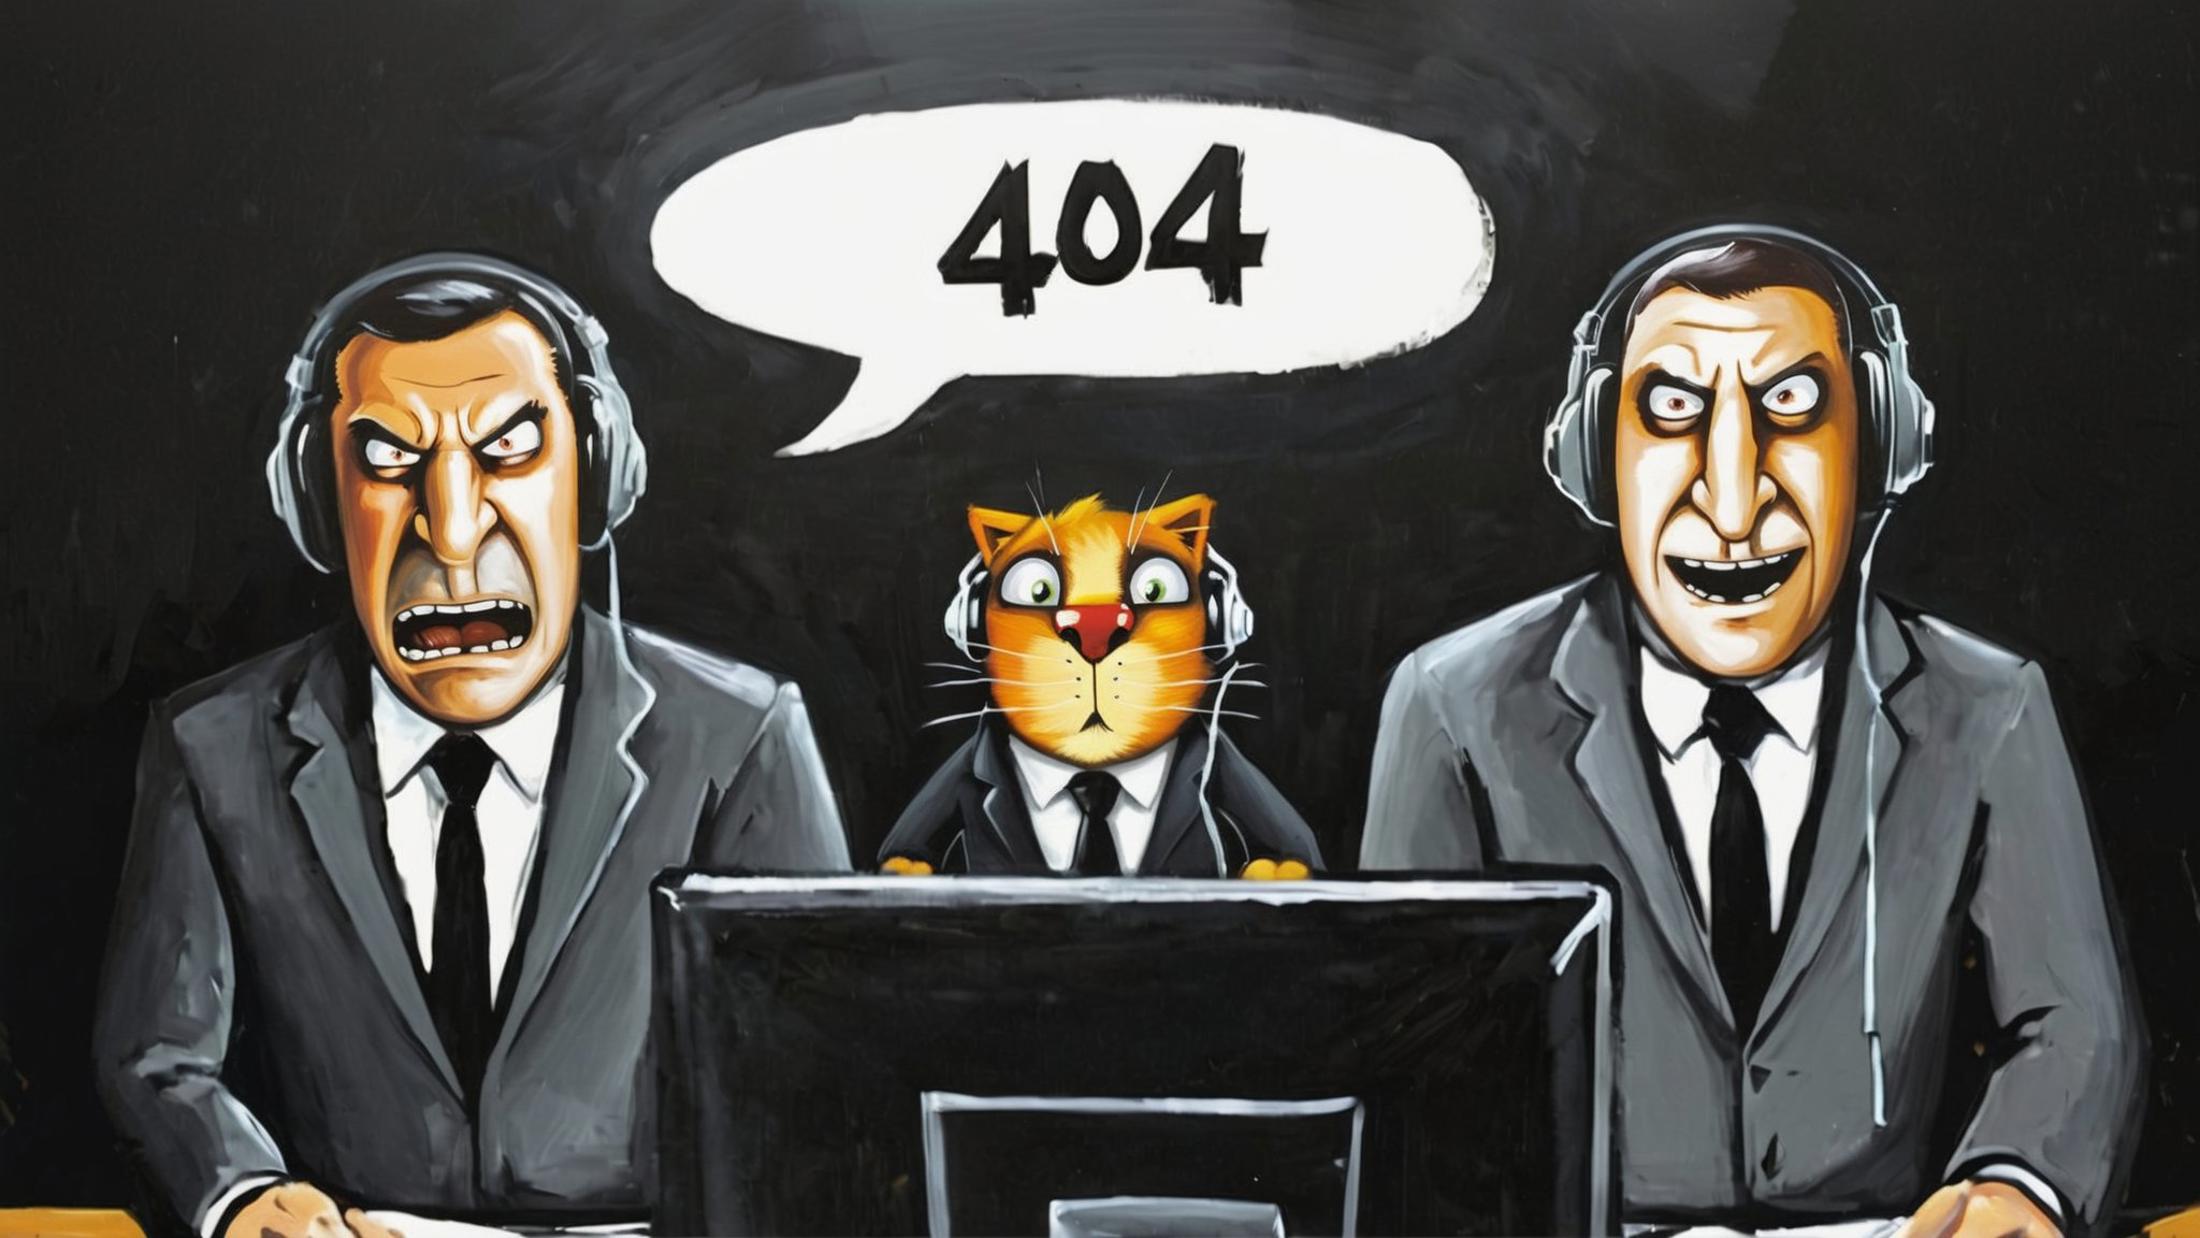 A cartoon cat in a suit with a "404" bubble above its head.